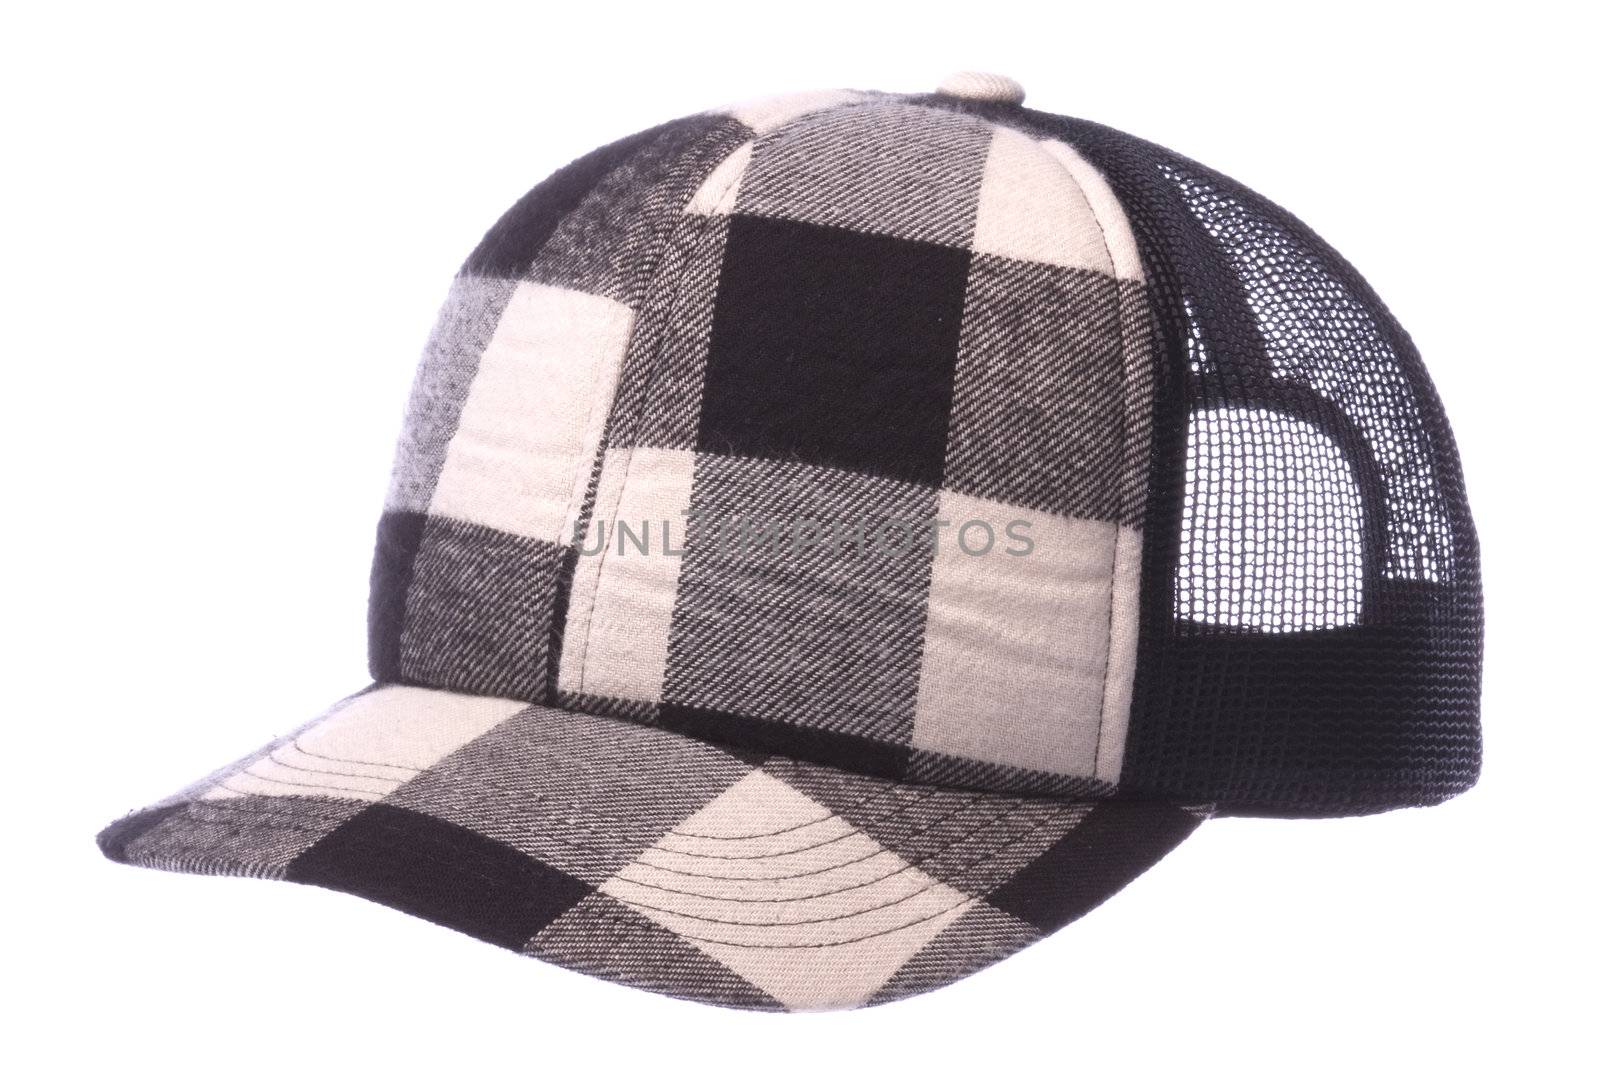 Isolated image of a baseball cap.